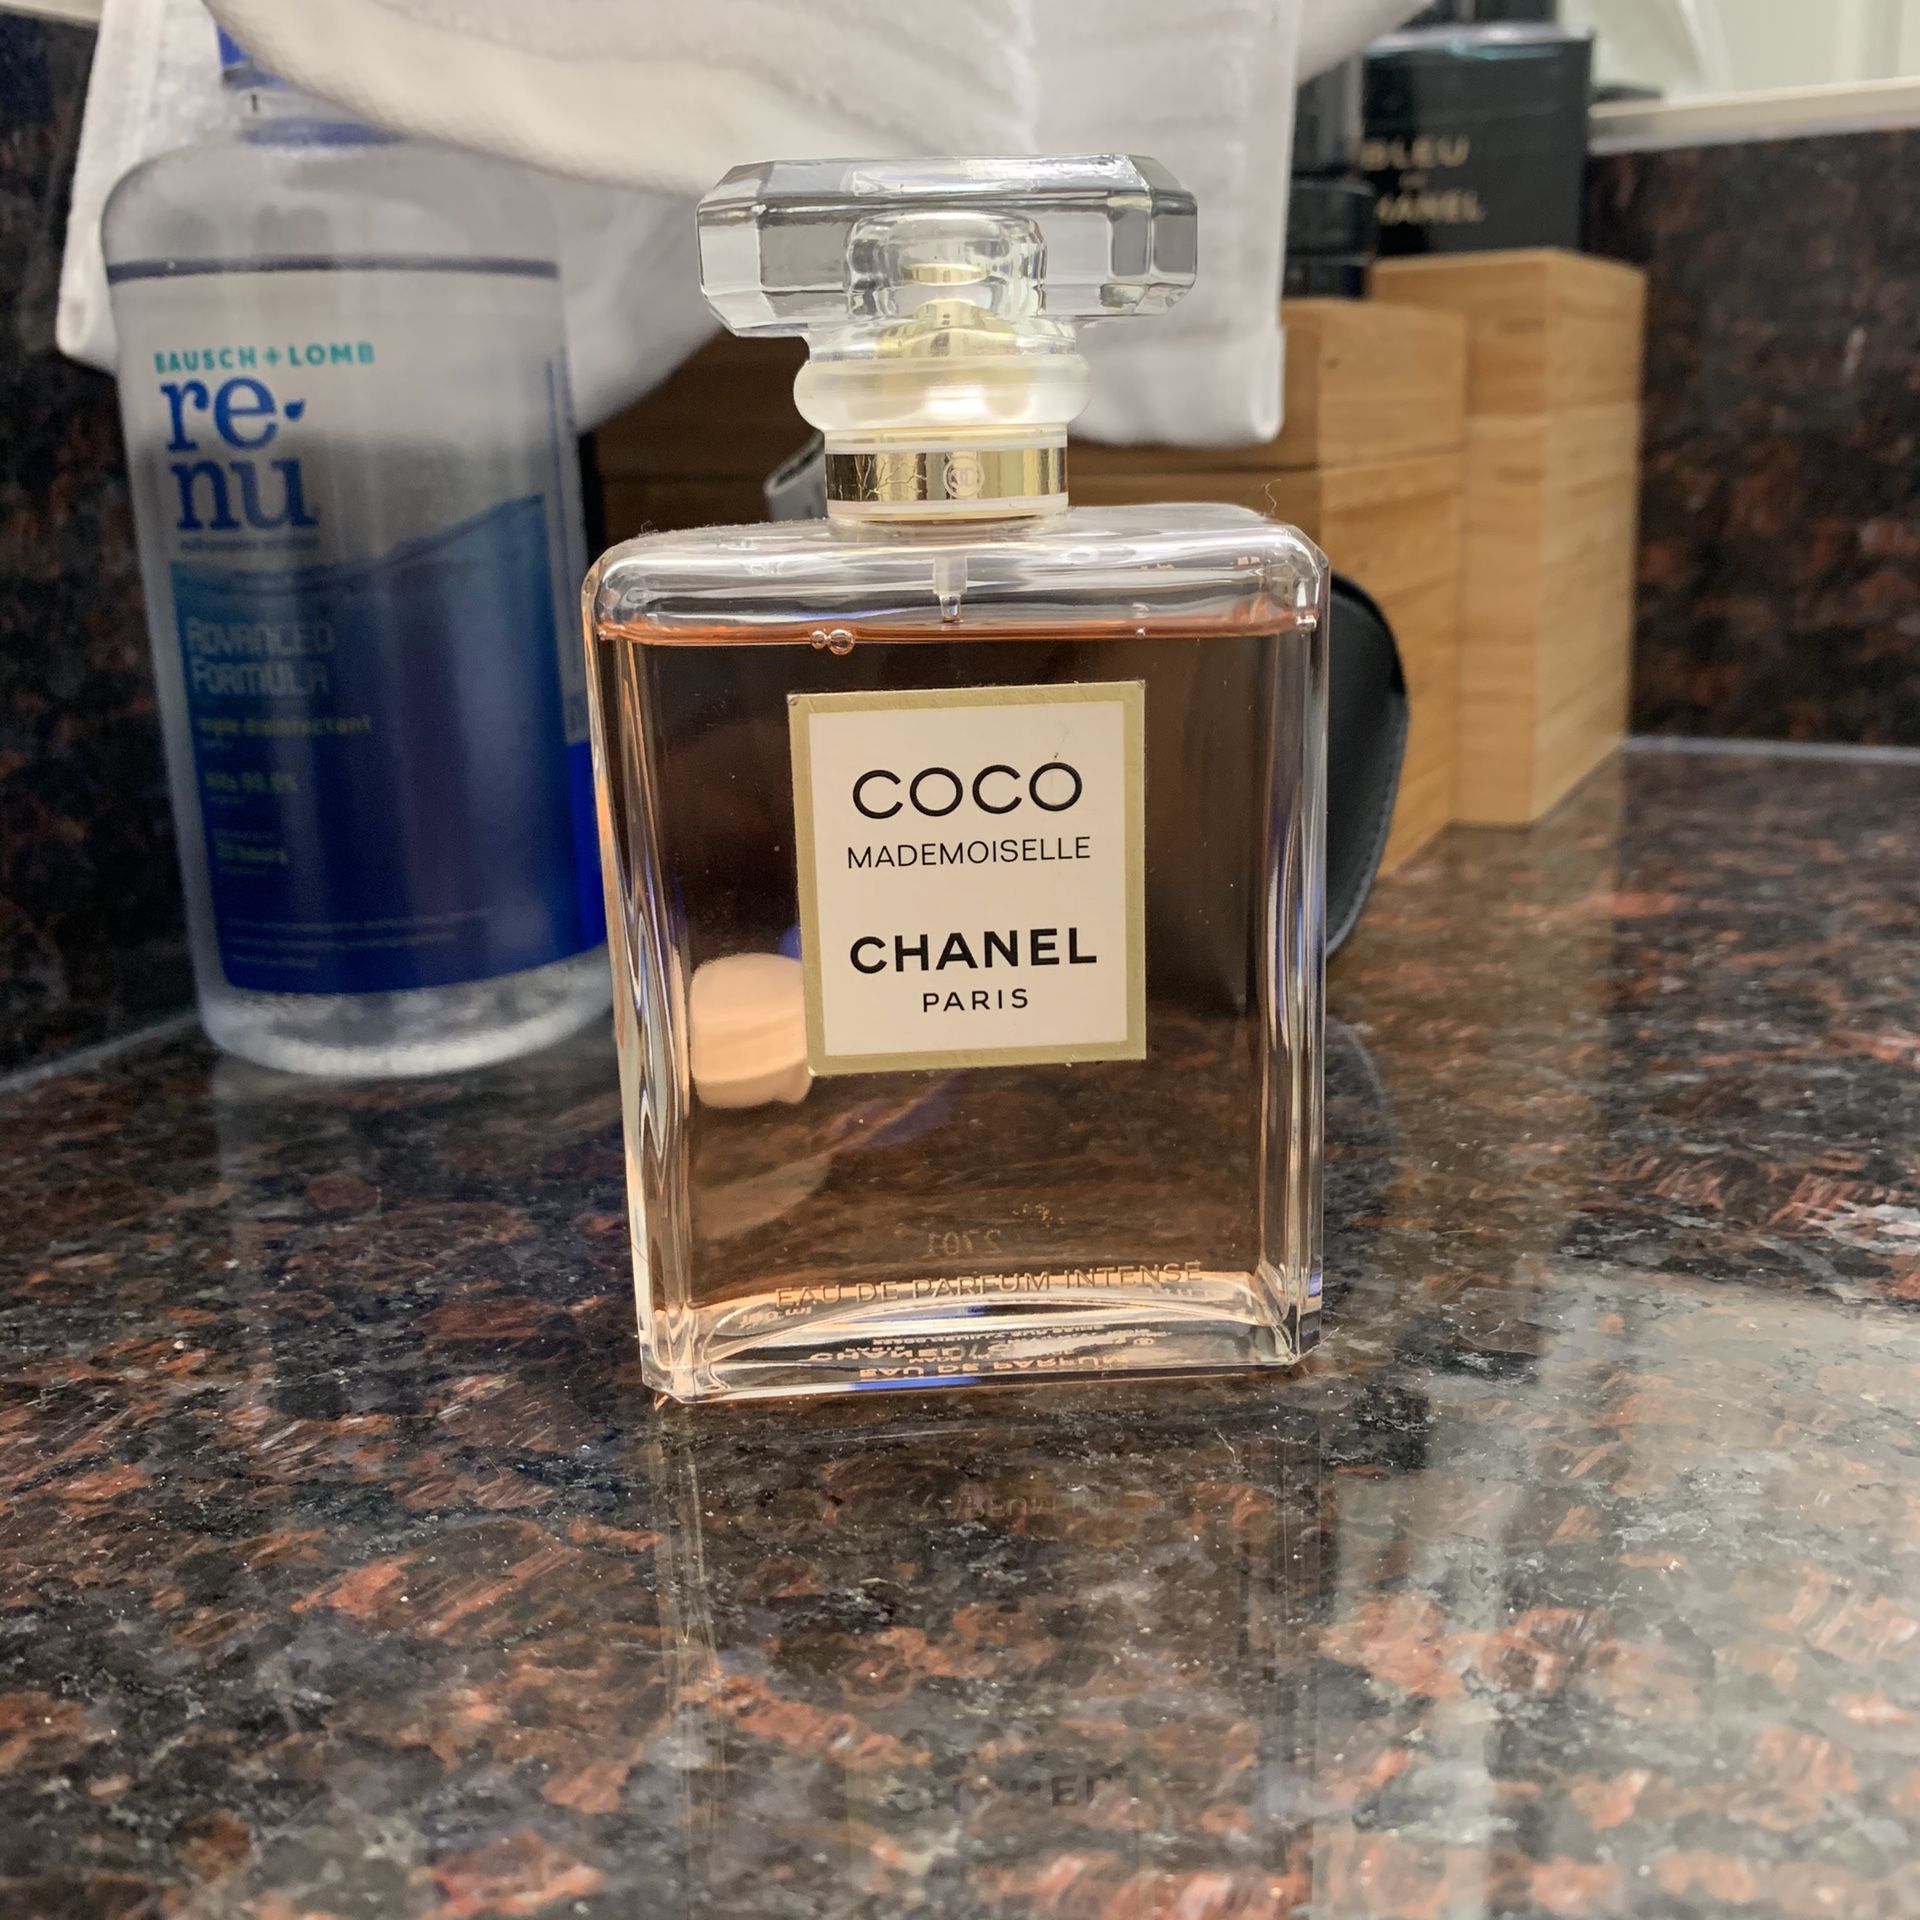 Almost full bottle of Coco mademoiselle Chanel perfume